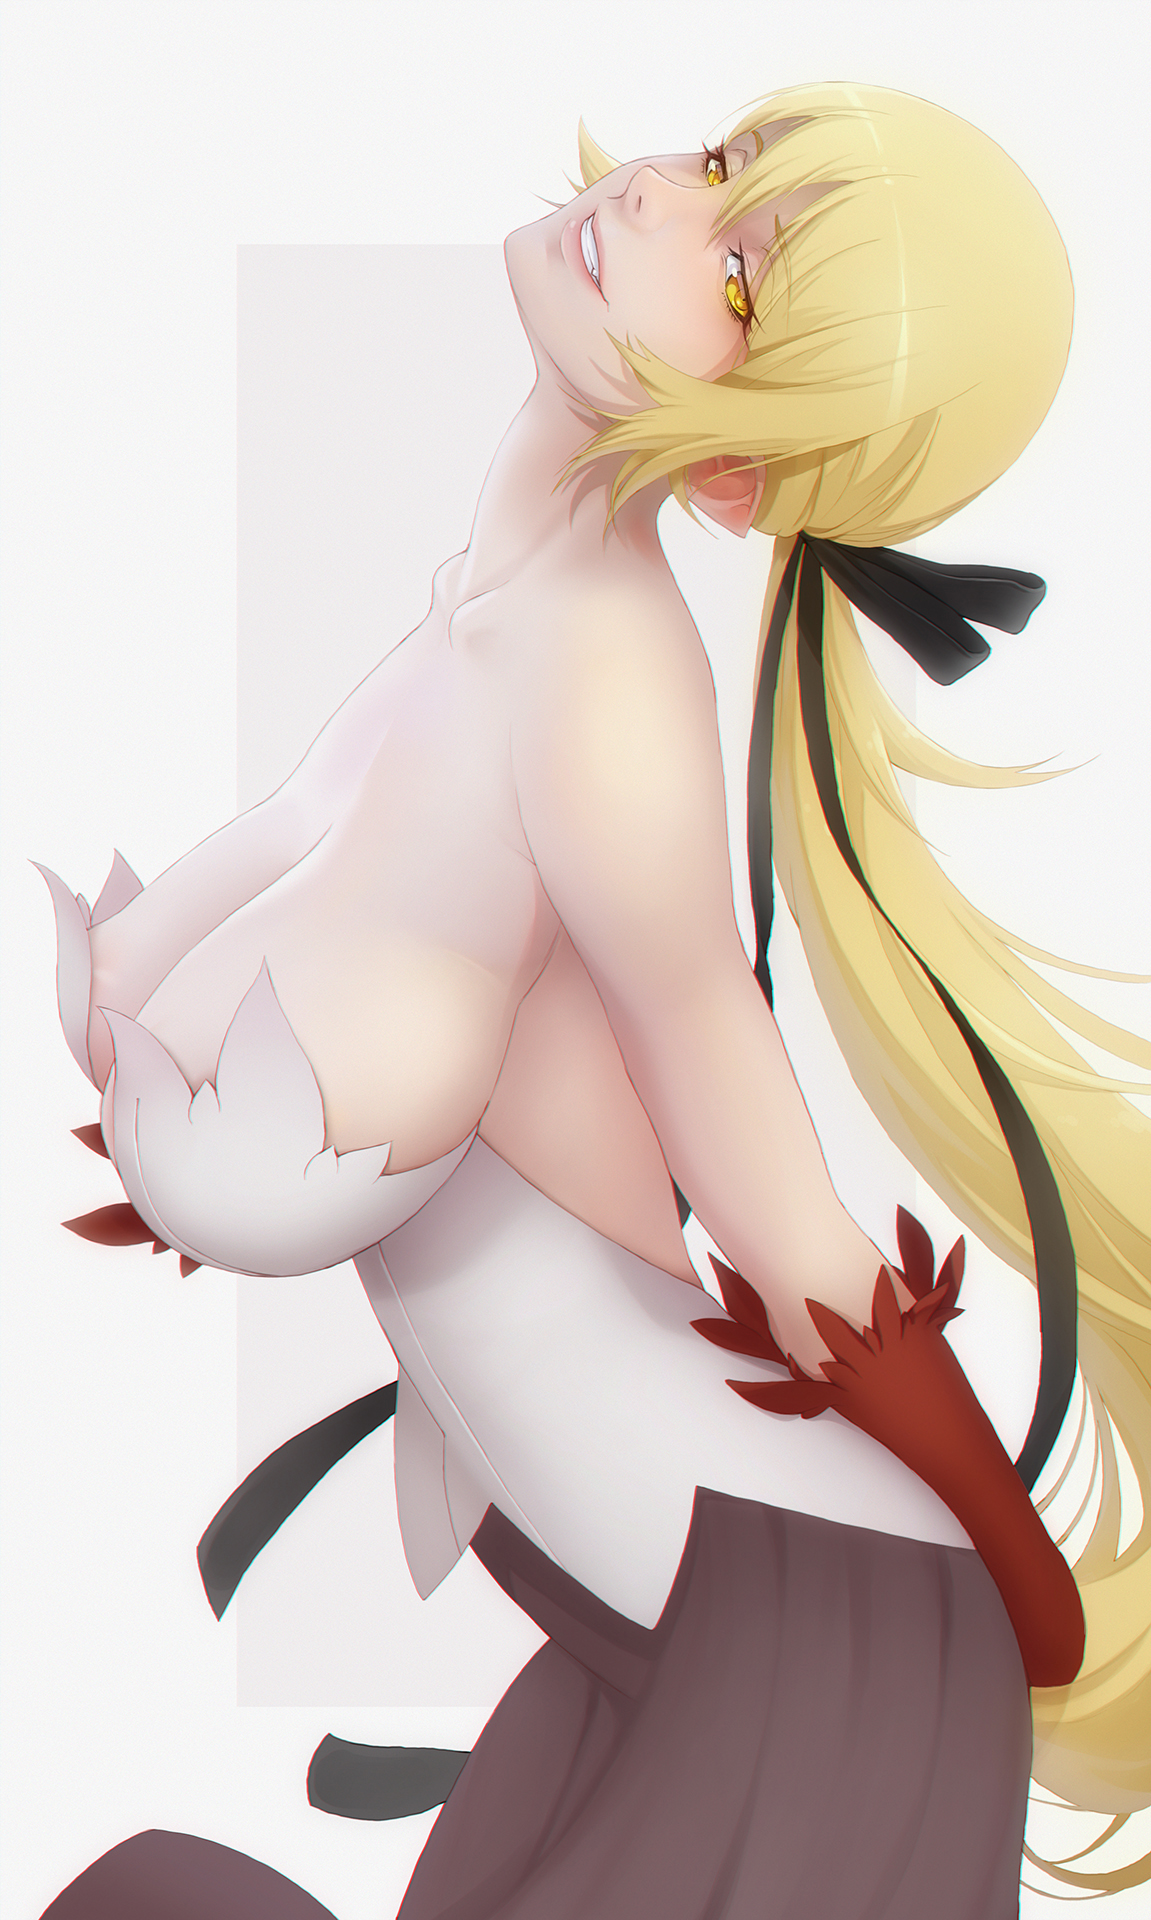 Anime 1151x1920 Monogatari Series big boobs cleavage no bra arm(s) behind back saggy boobs smiling parted lips yellow eyes monster girl vampires ponytail looking at viewer strapless dress bareback side view bangs Oshino Shinobu long hair ecchi erotic art  red gloves hair ribbon head tilt simple background anime 2D portrait display k19chan bare shoulders pointy ears fangs anime girls fan art pink lipstick pale curvy blonde gloves elbow gloves